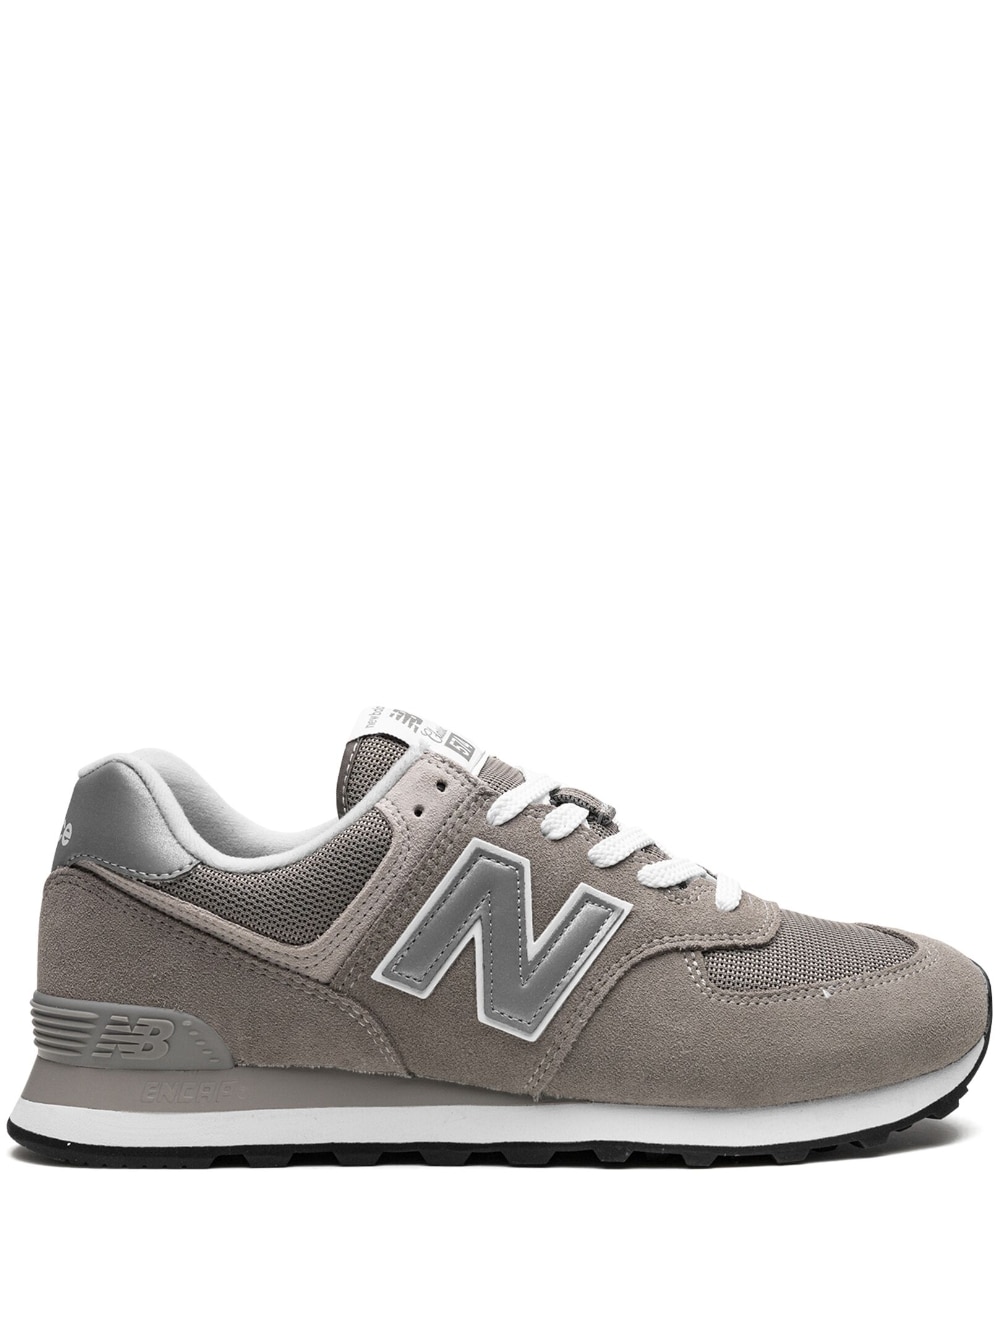 New Balance 574 low-top sneakers - Neutrals